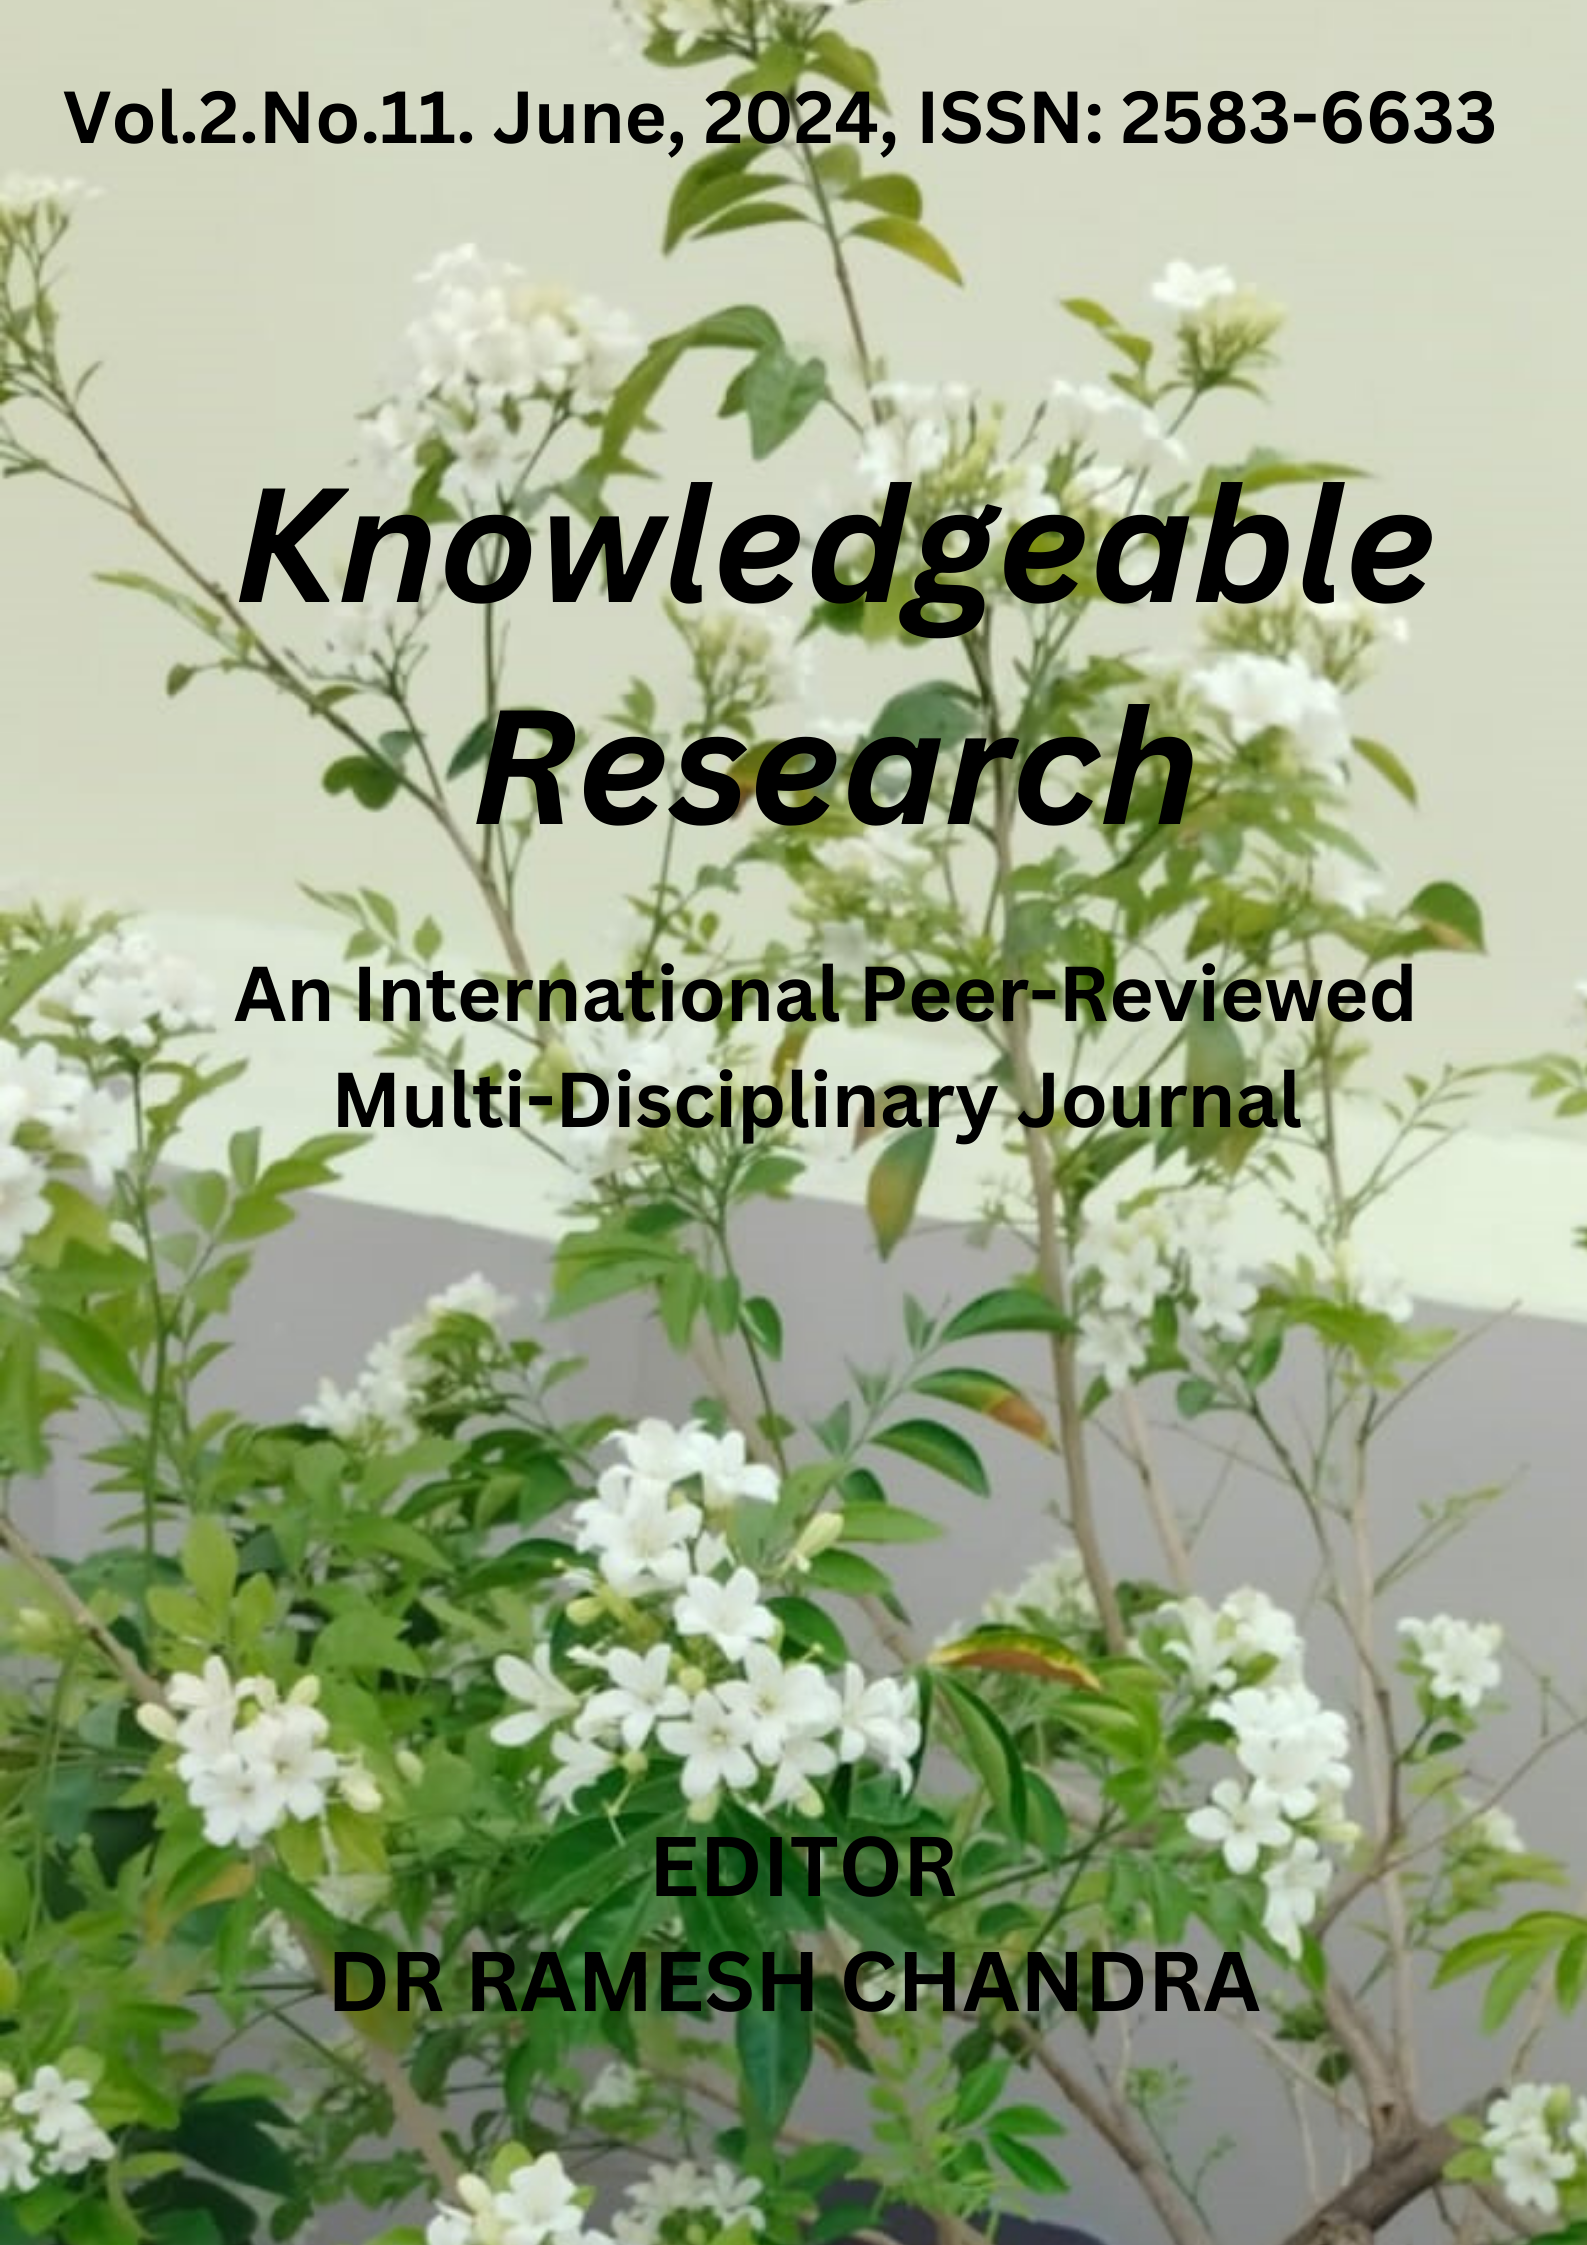 					View Vol. 2 No. 11 (2024): Knowledgeable Research
				